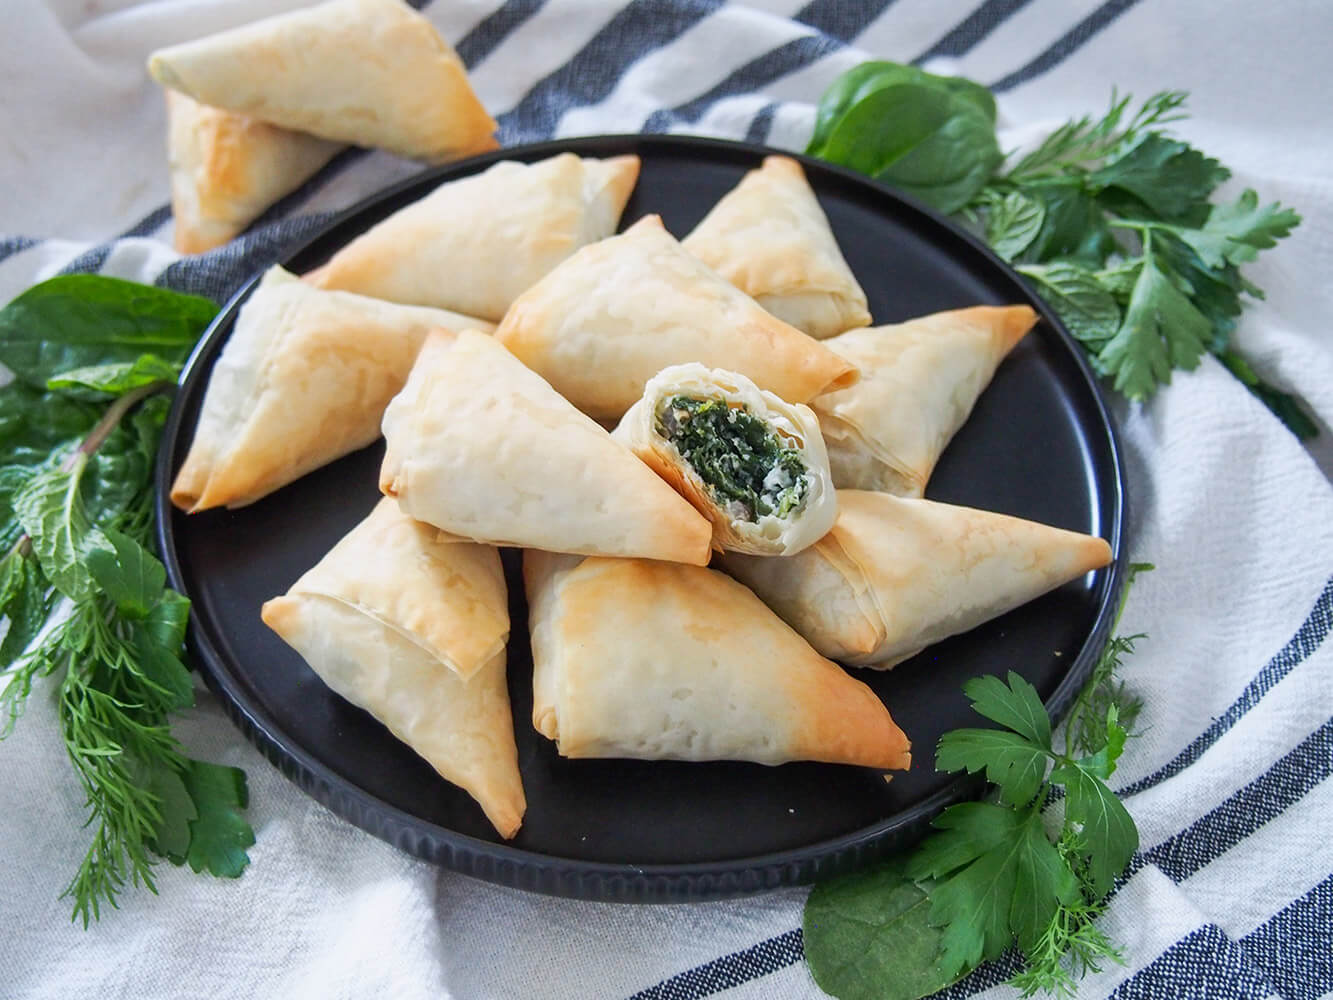 spanakopita triangles on plate with one bitten into, resting on others showing filling inside